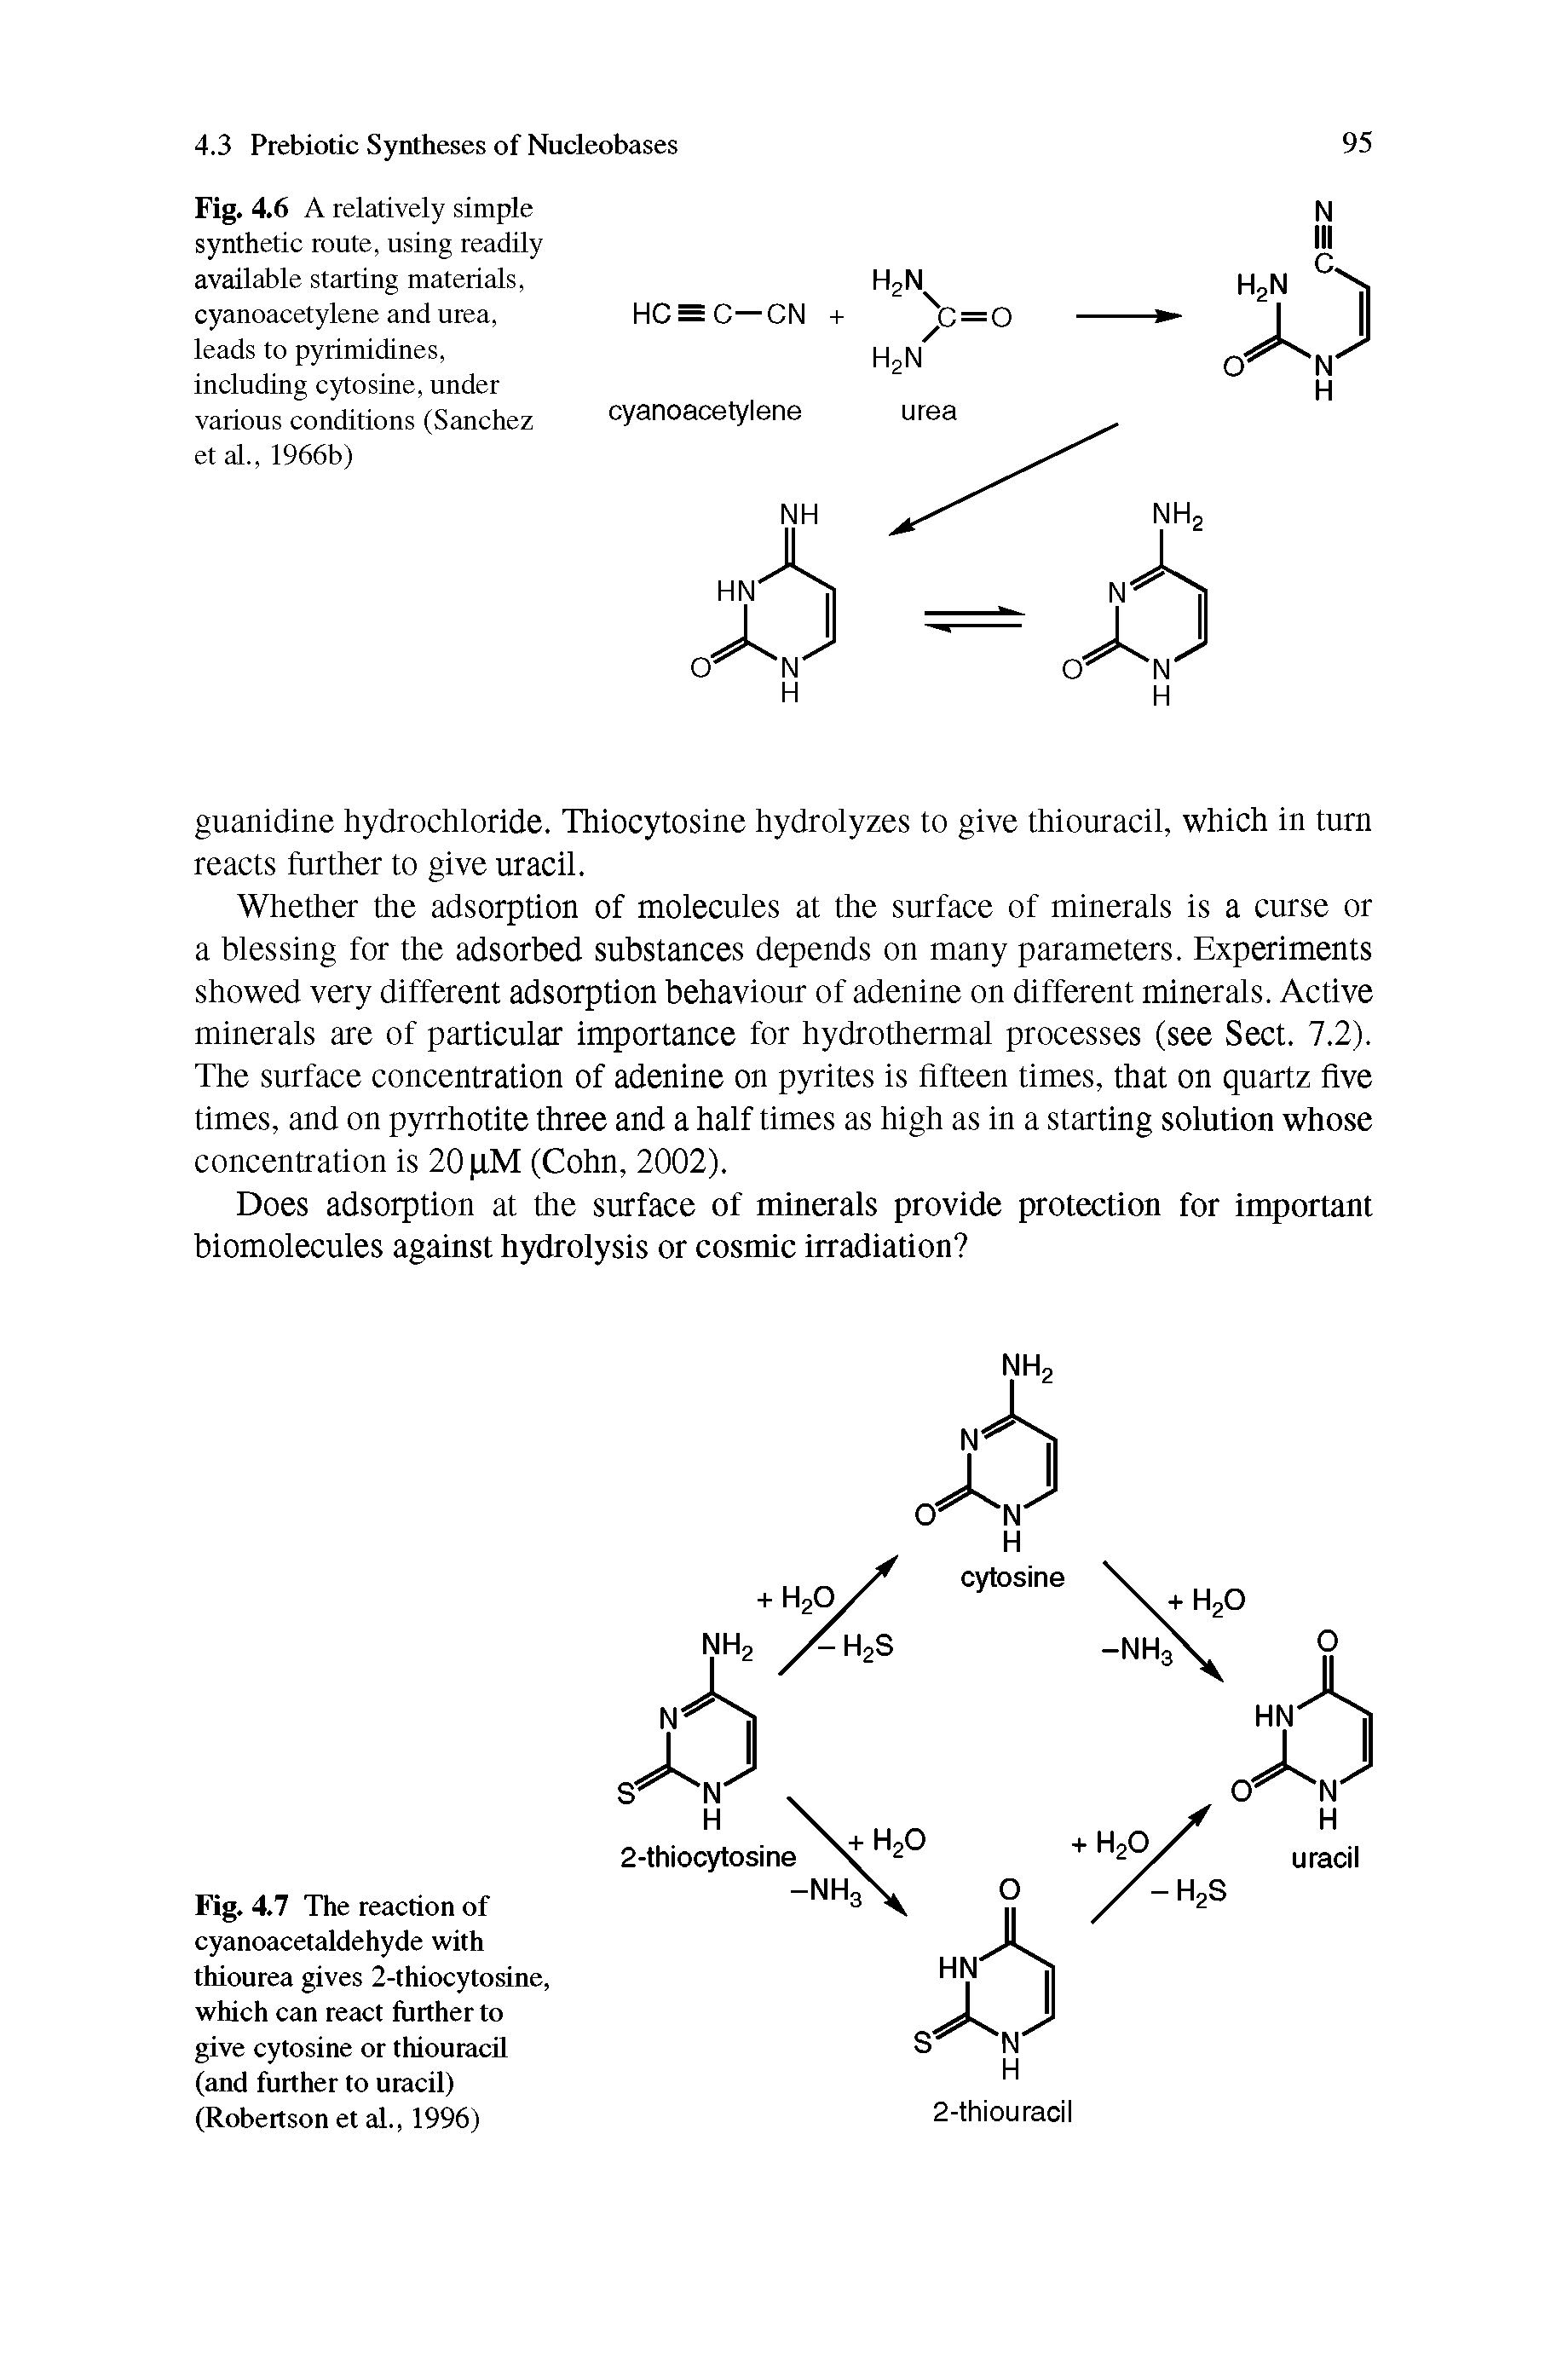 Fig. 4.6 A relatively simple synthetic route, using readily available starting materials, cyanoacetylene and urea,...